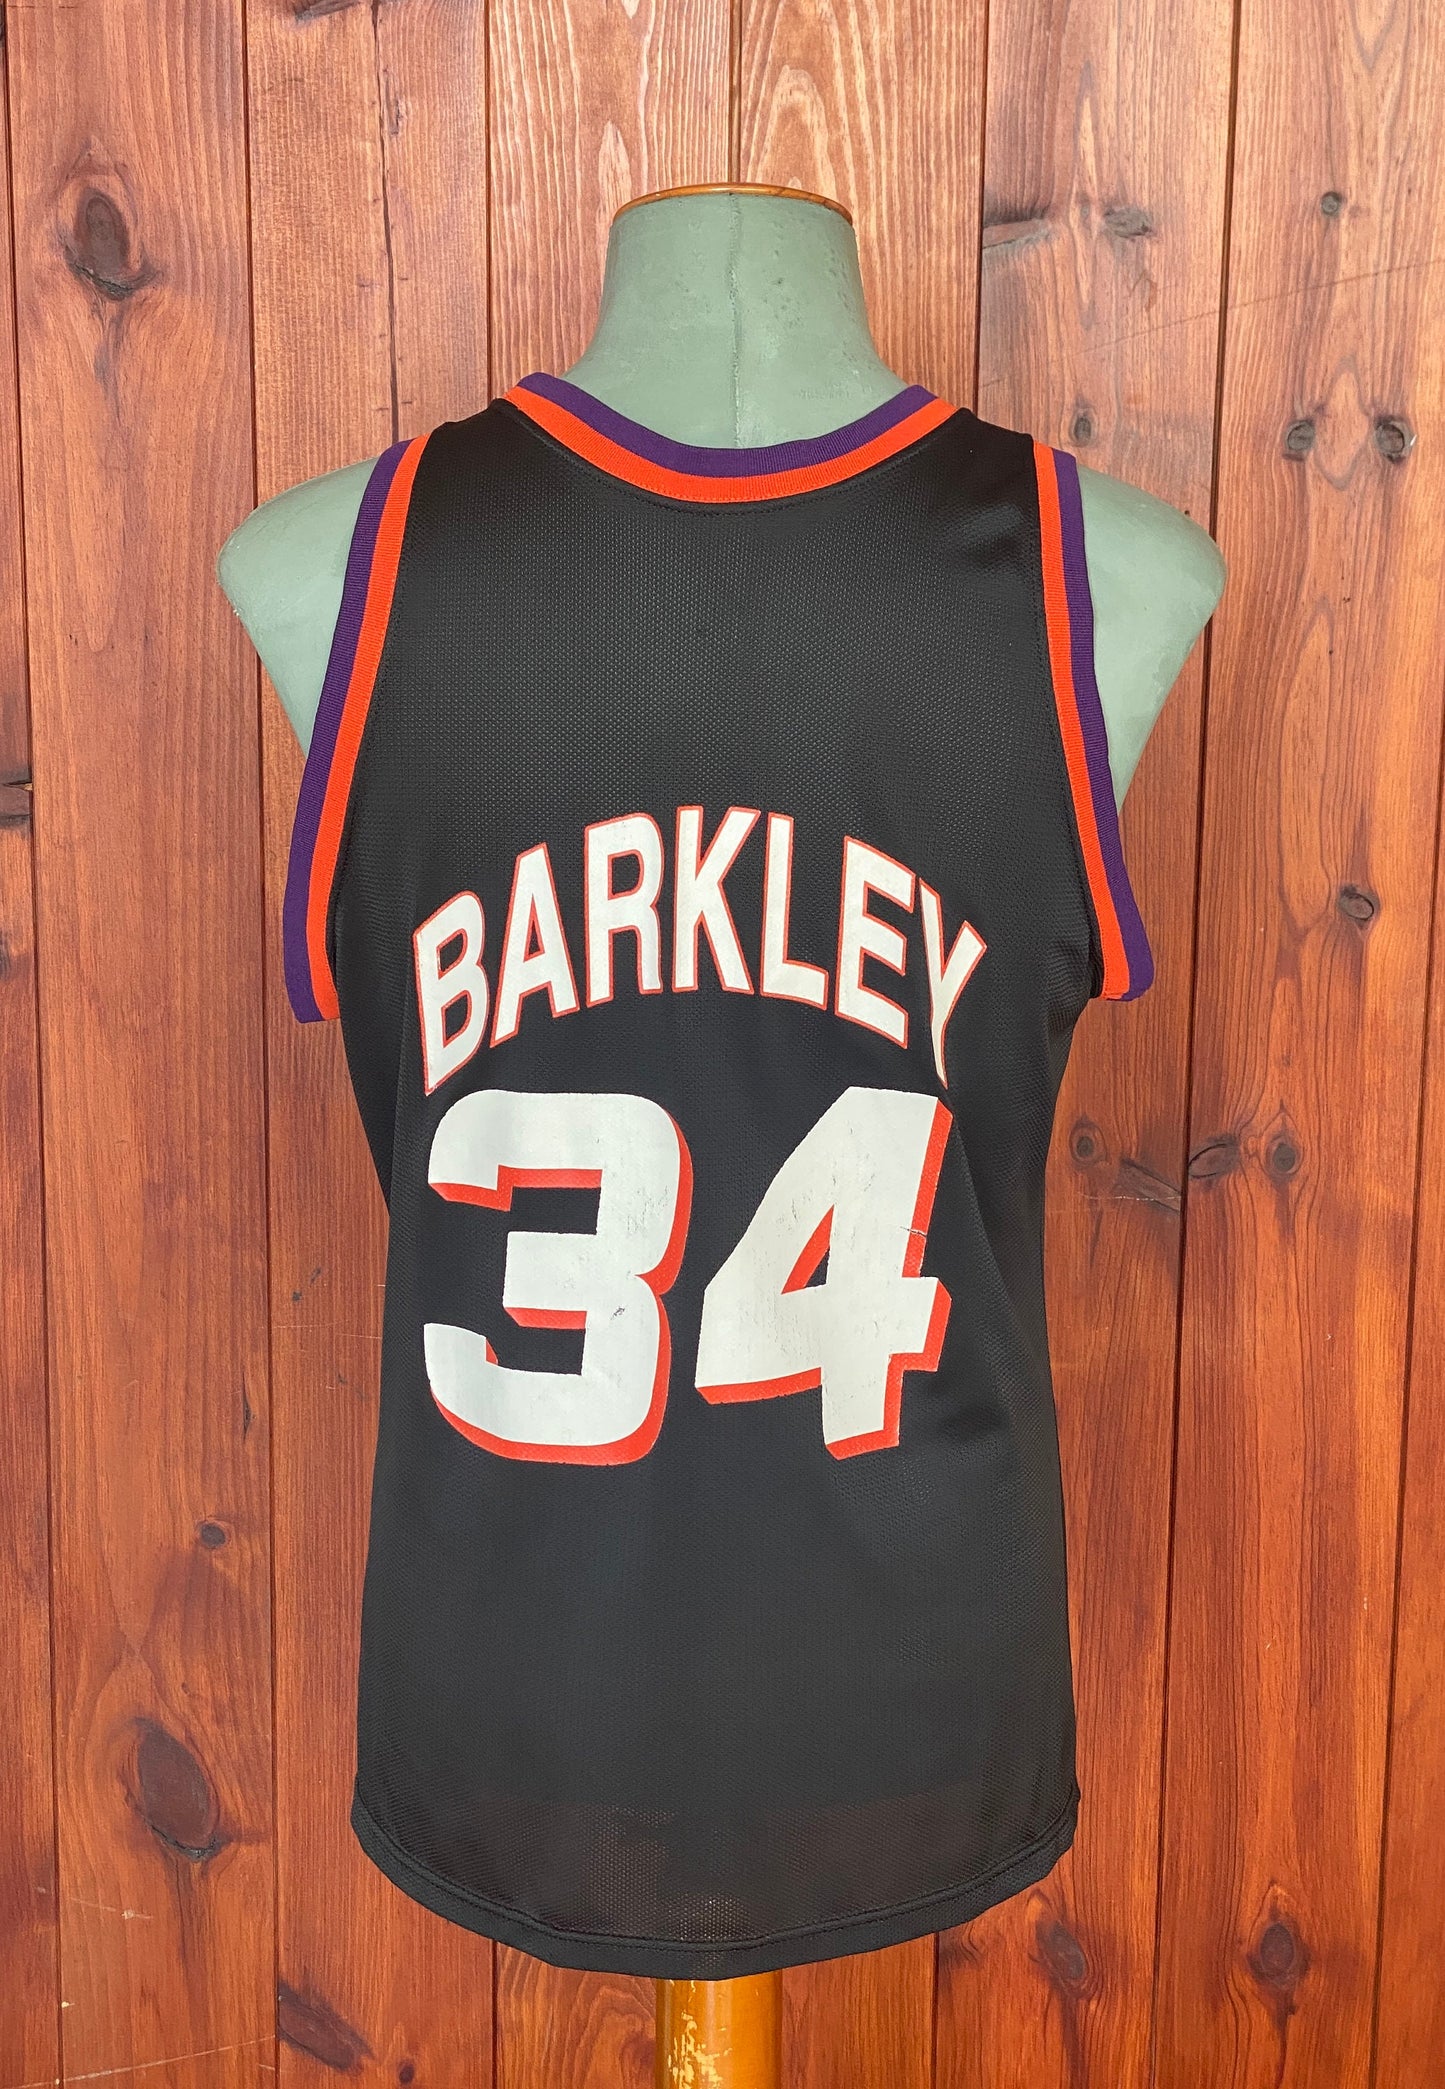 Vintage 90s NBA Phoenix Suns Charles Barkley #34 jersey, size 44 - back view. Made in USA by Champion.